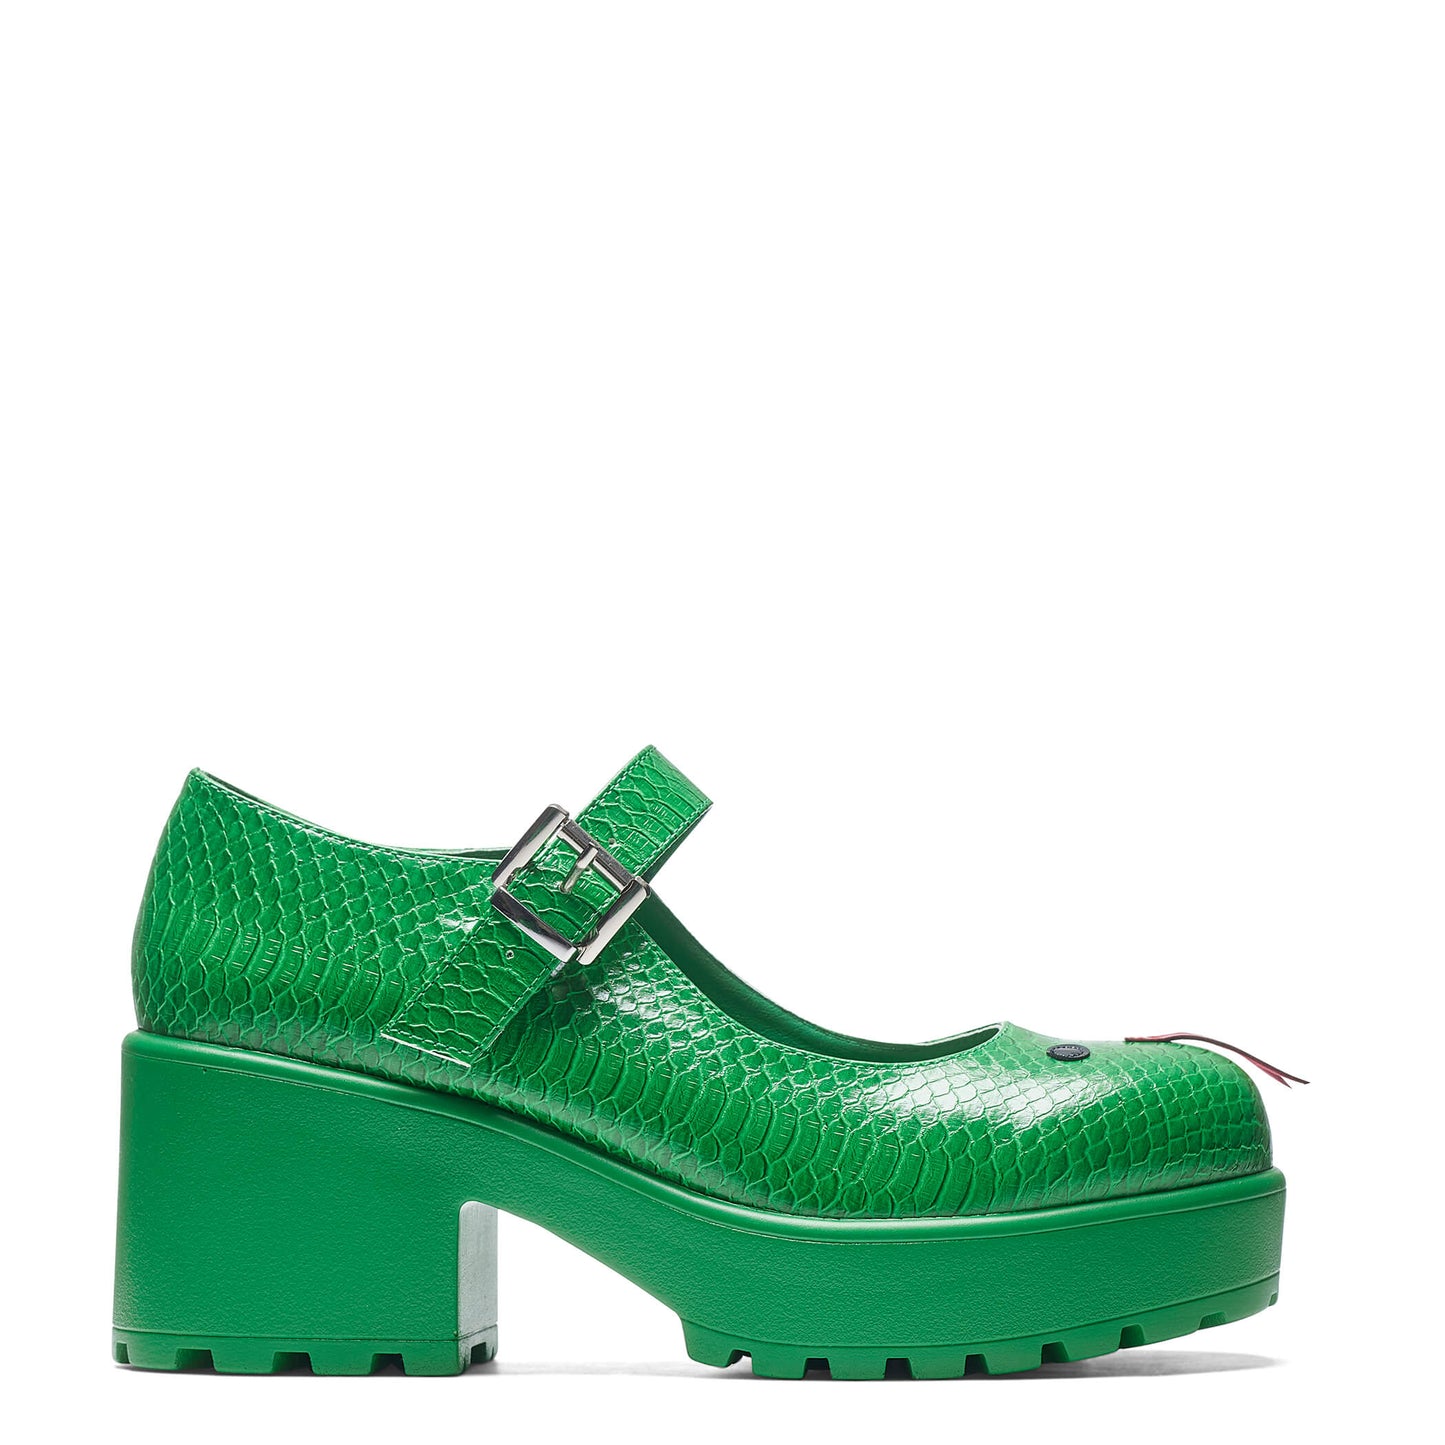 Tira Mary Janes Shoes 'Sassy Snake Edition' - Green - KOI Footwear - Side View